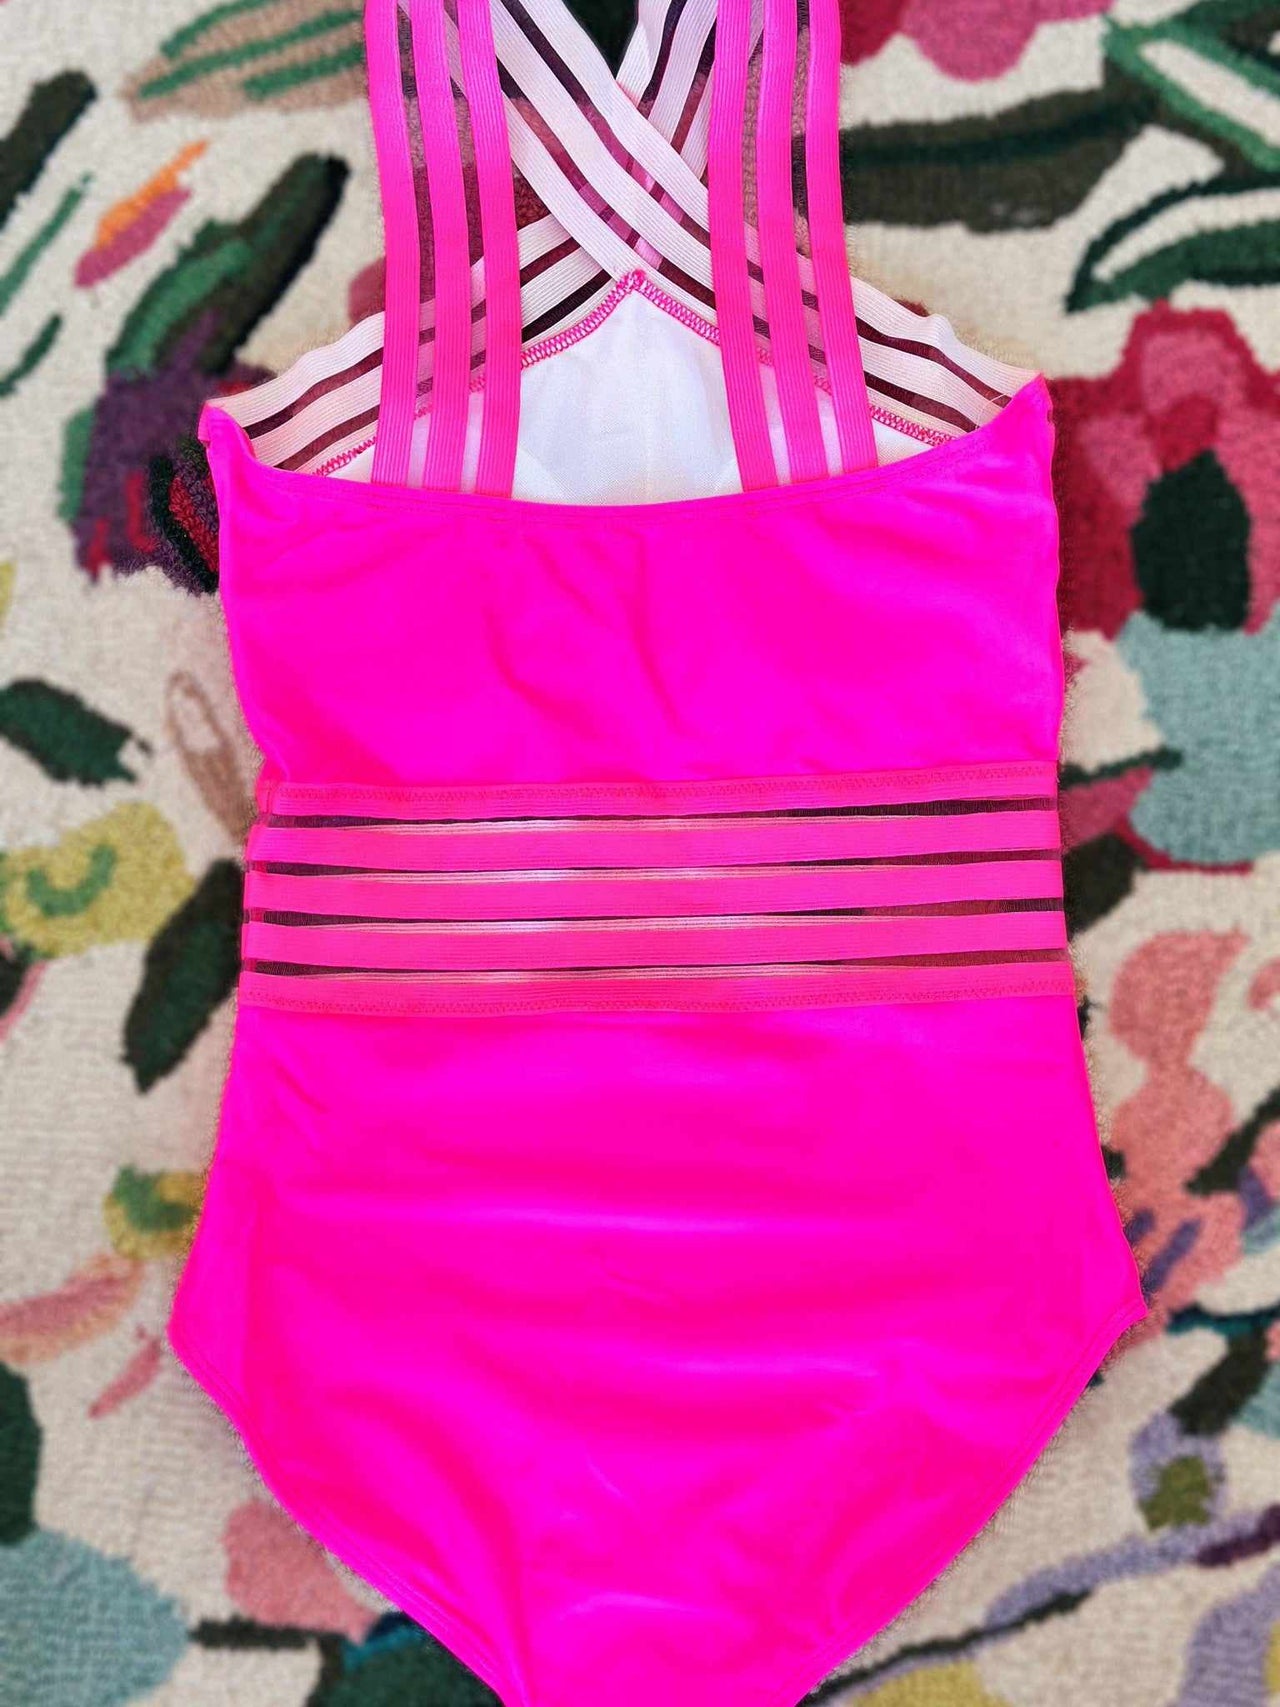 Pink one piece bathing suit with sheer stripe design.